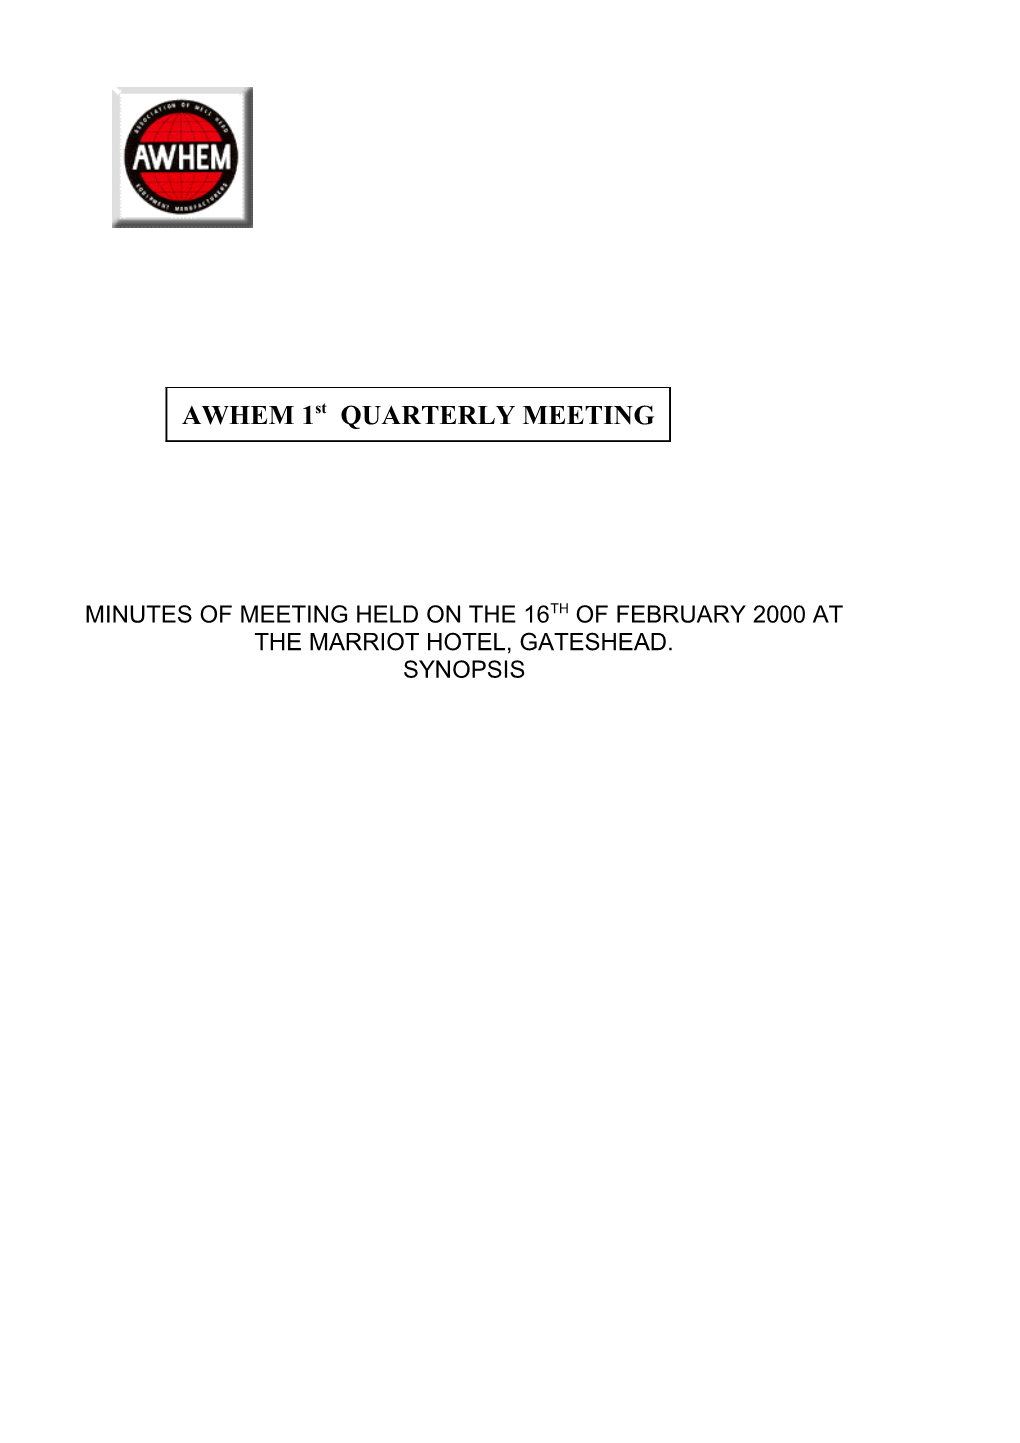 Minutes of Meeting Held on the 16Th of February 2000 at the Marriot Hotel, Gateshead